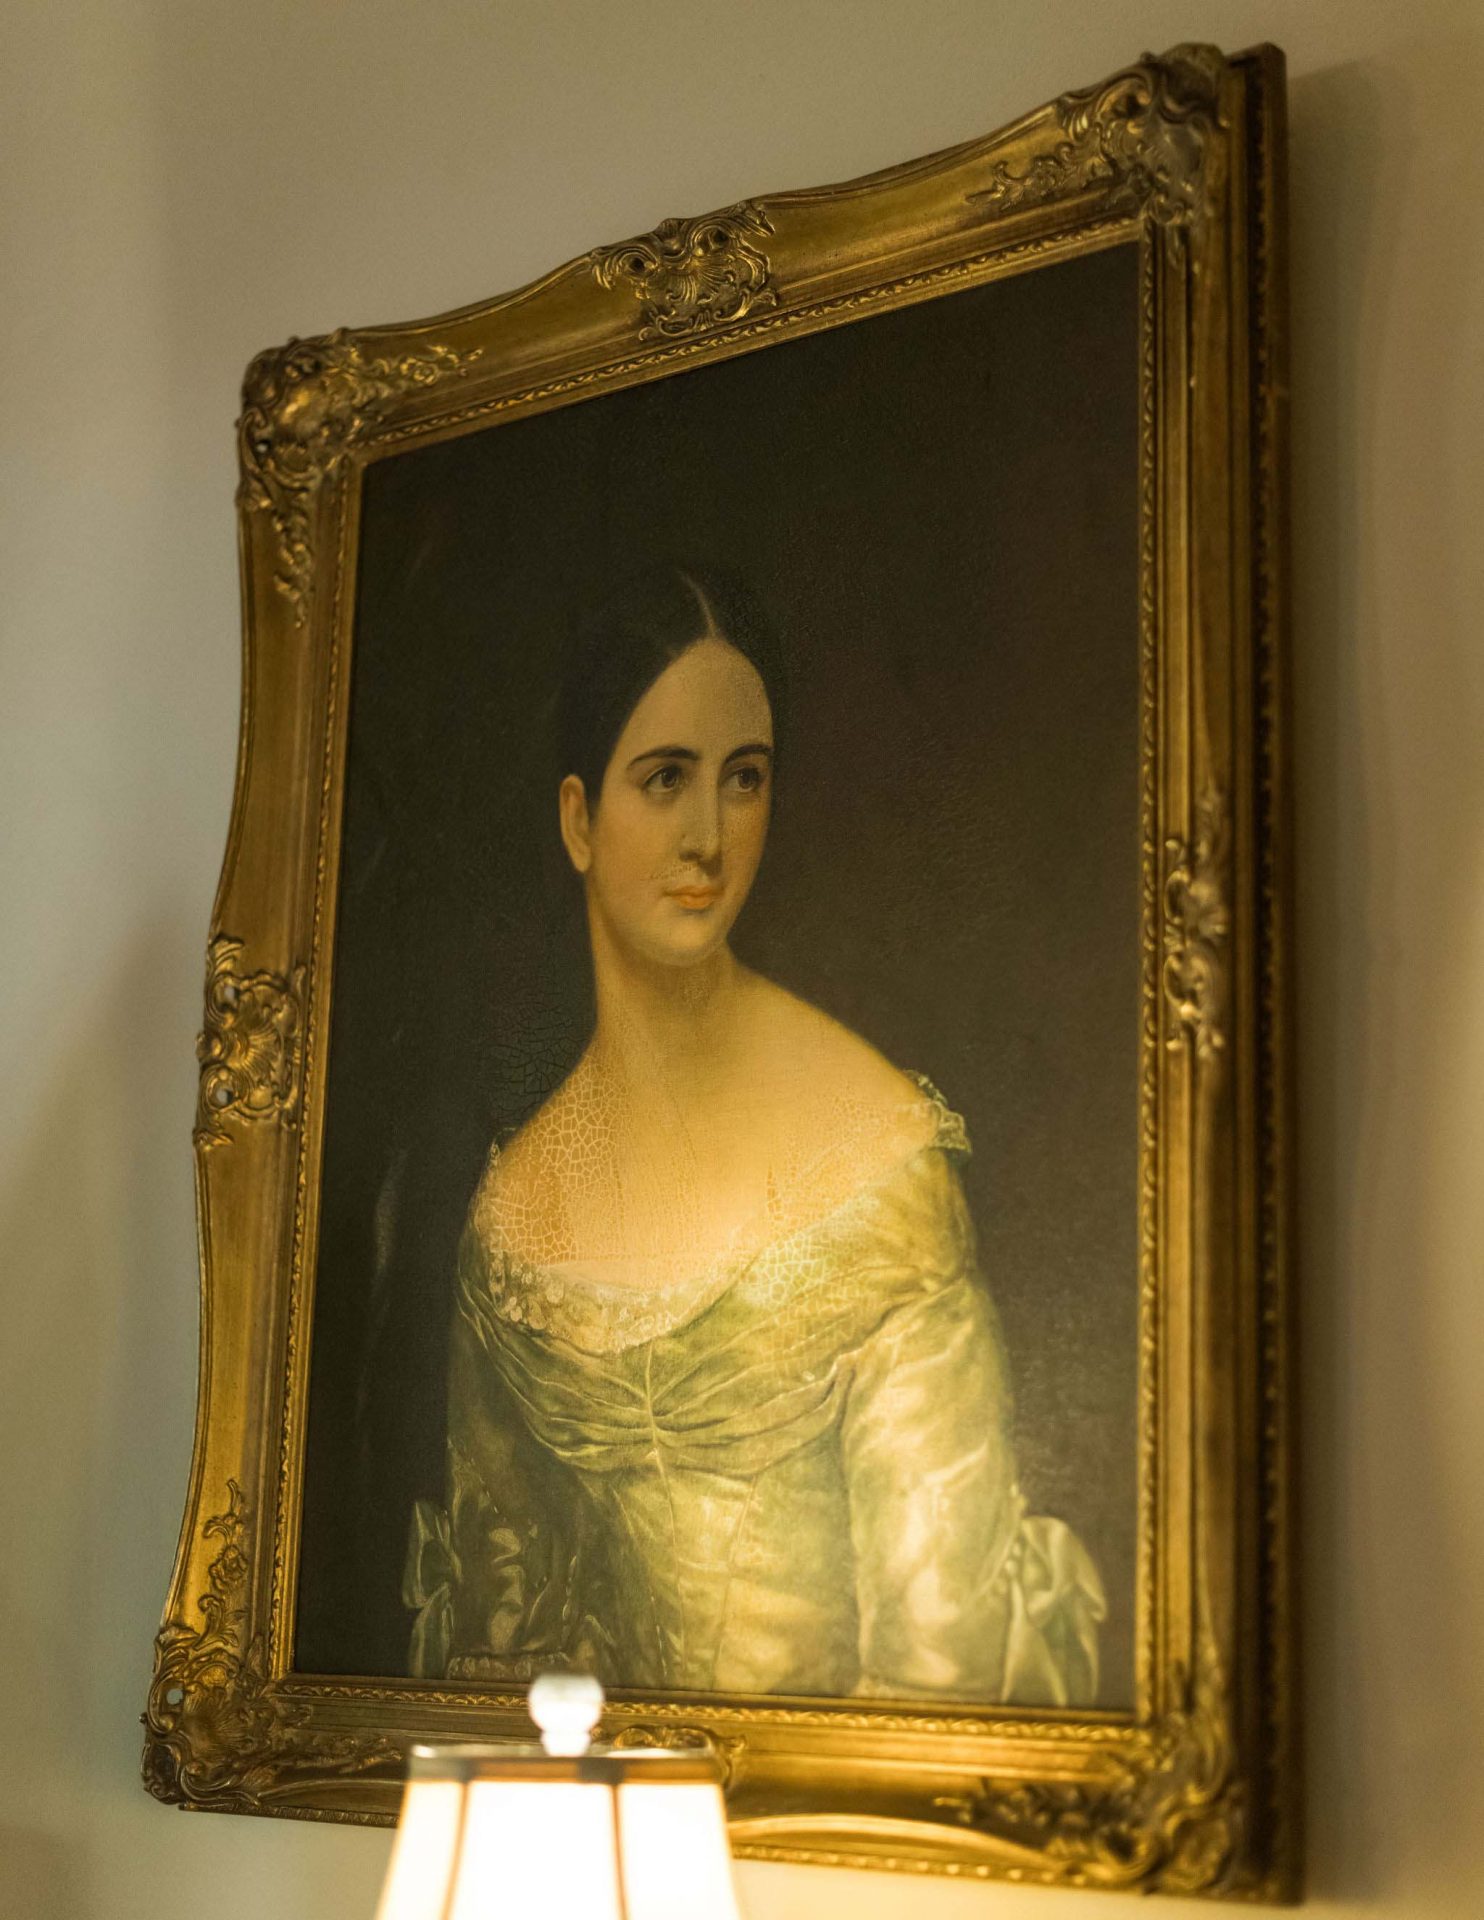 A close-up on a woman's portrait in a golden frame.